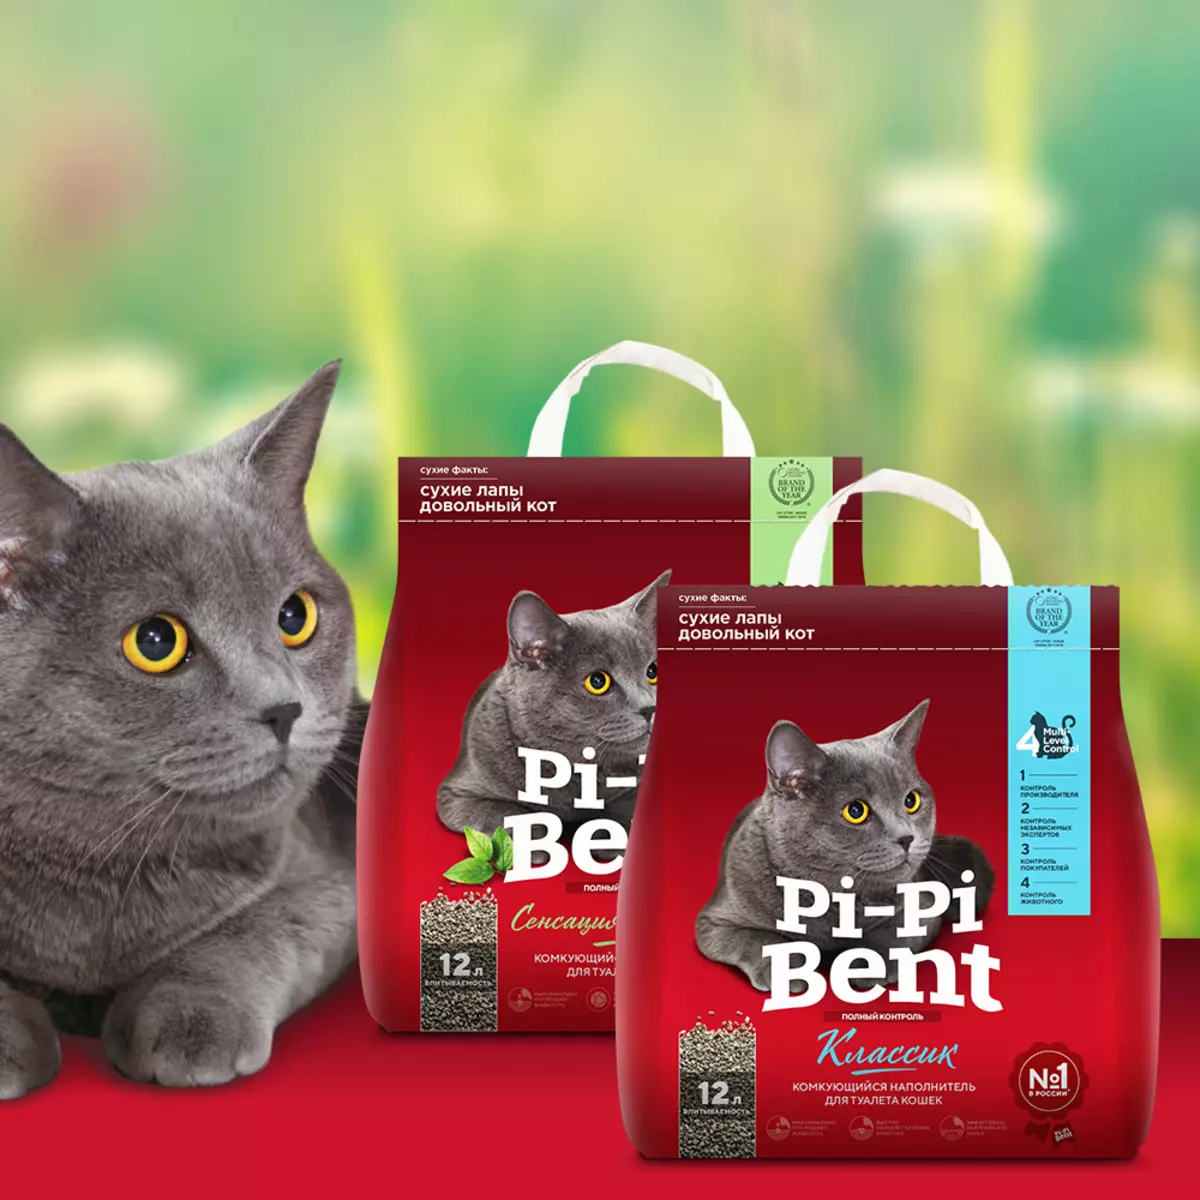 PI-PI BENT fillers: Overview of commercial fillers for feline toilet 15 kg and other volume, reviews 22619_14